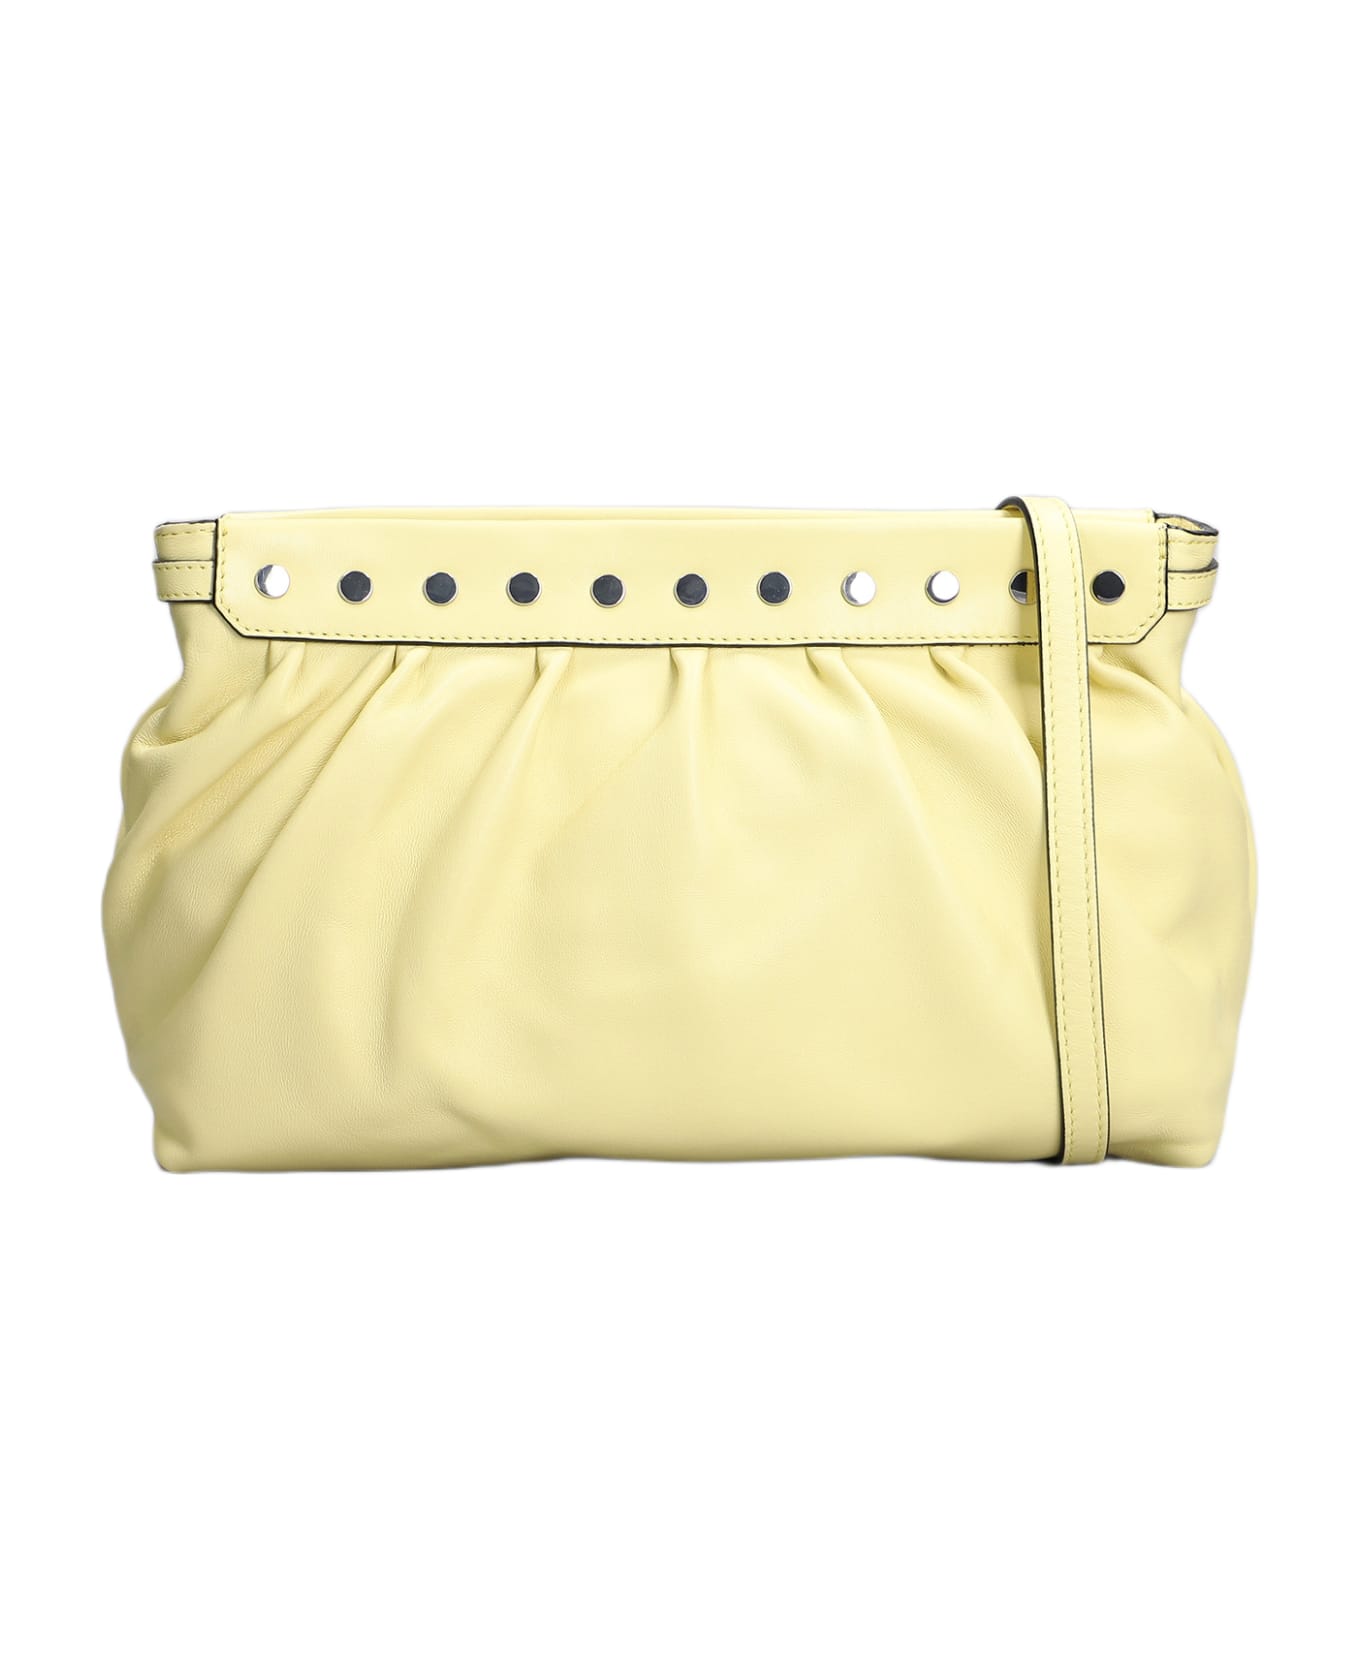 Isabel Marant Luz Clutch In Yellow Leather - yellow クラッチバッグ